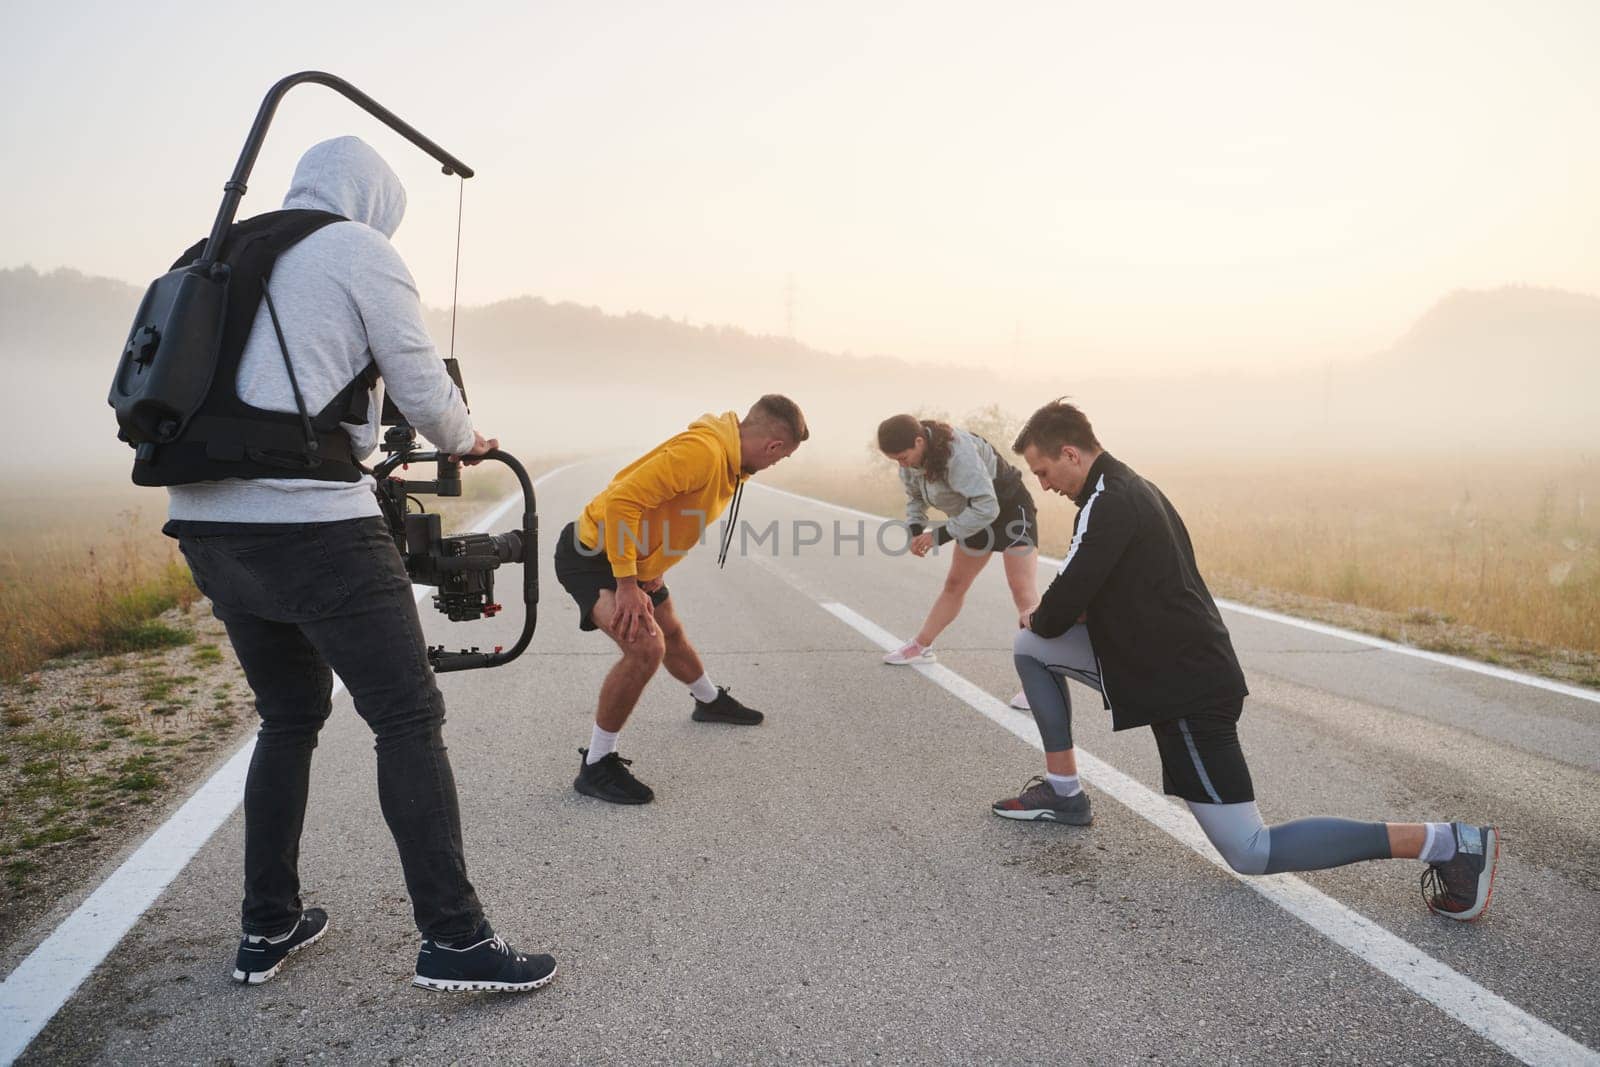 A skilled videographer captures the dynamic scene as athletes engage in warming up and stretching exercises in preparation for their morning run, showcasing dedication and teamwork behind the lens.